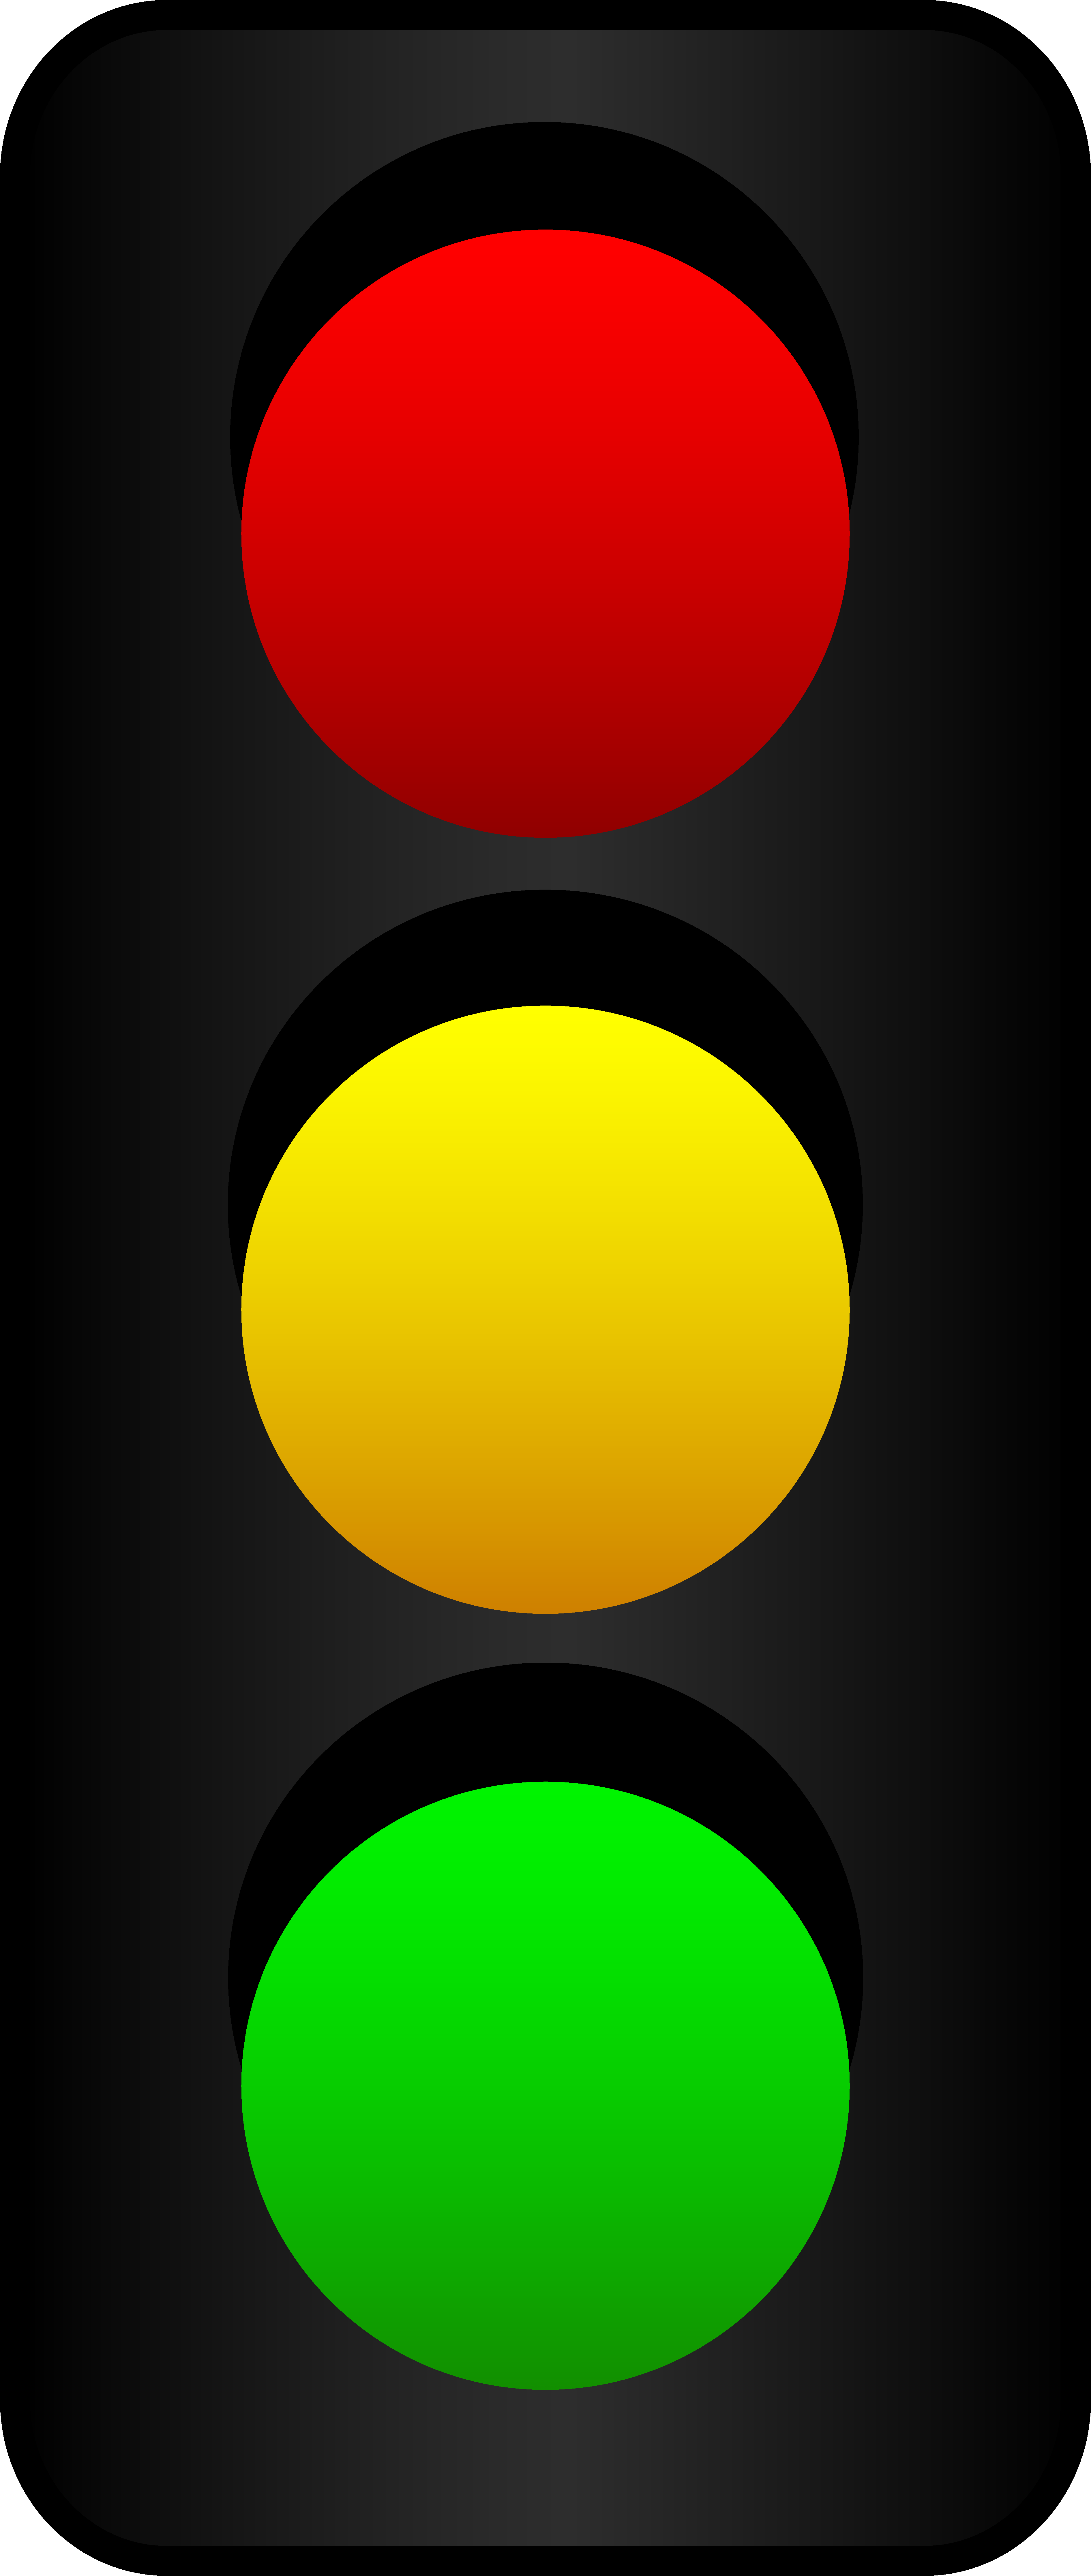 Traffic light clipart images.